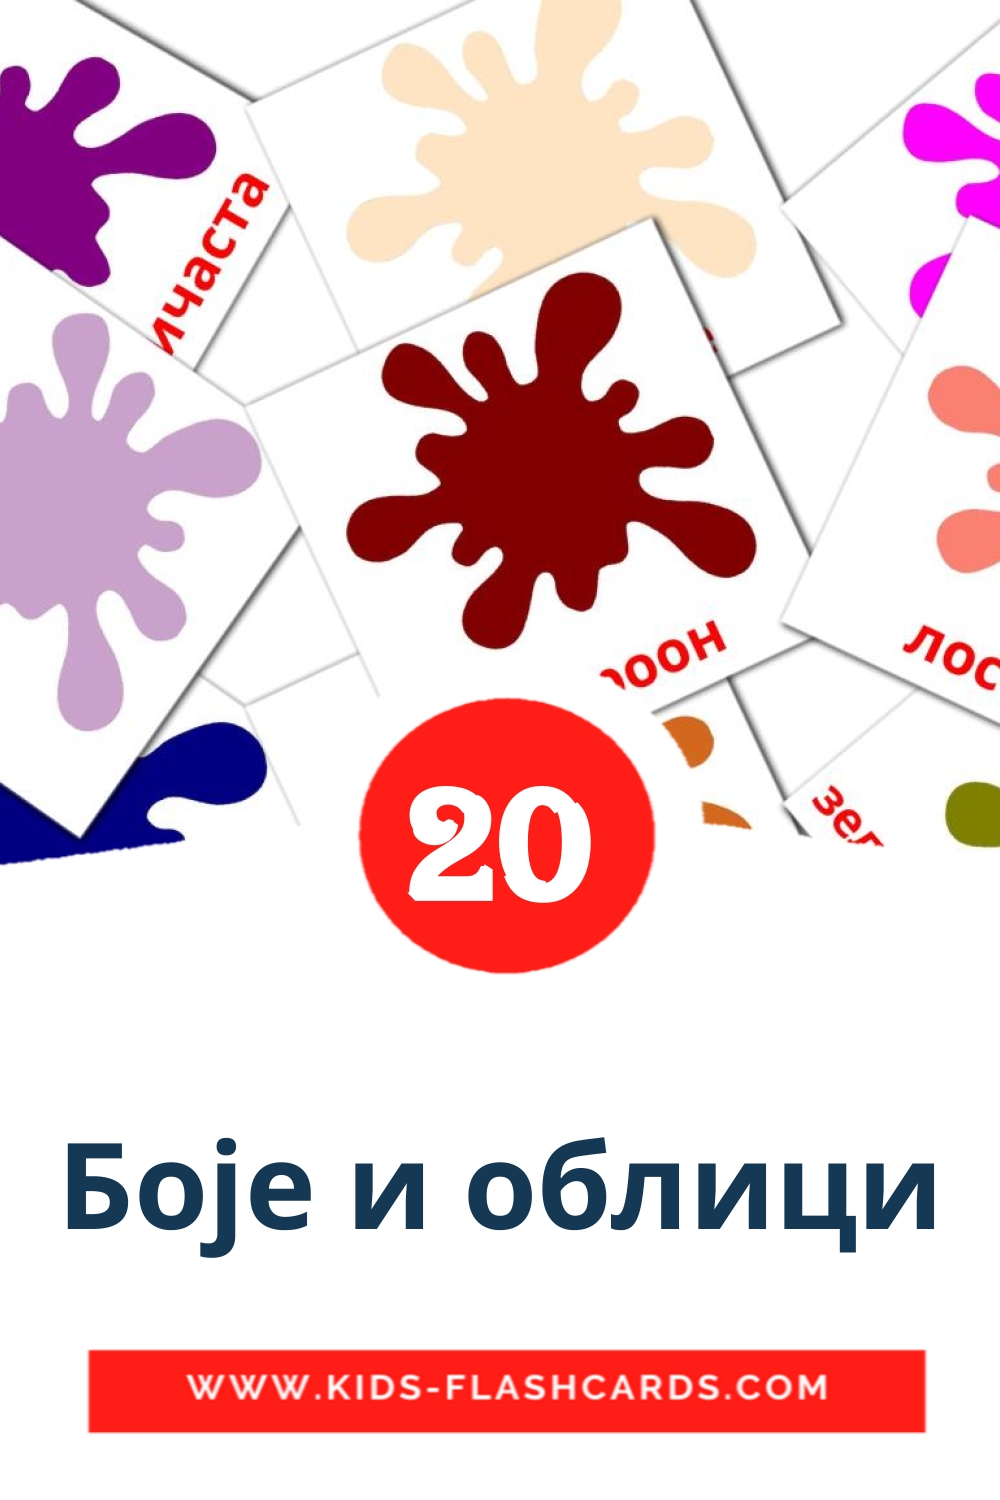 20 Боје и облици Picture Cards for Kindergarden in serbian(cyrillic)